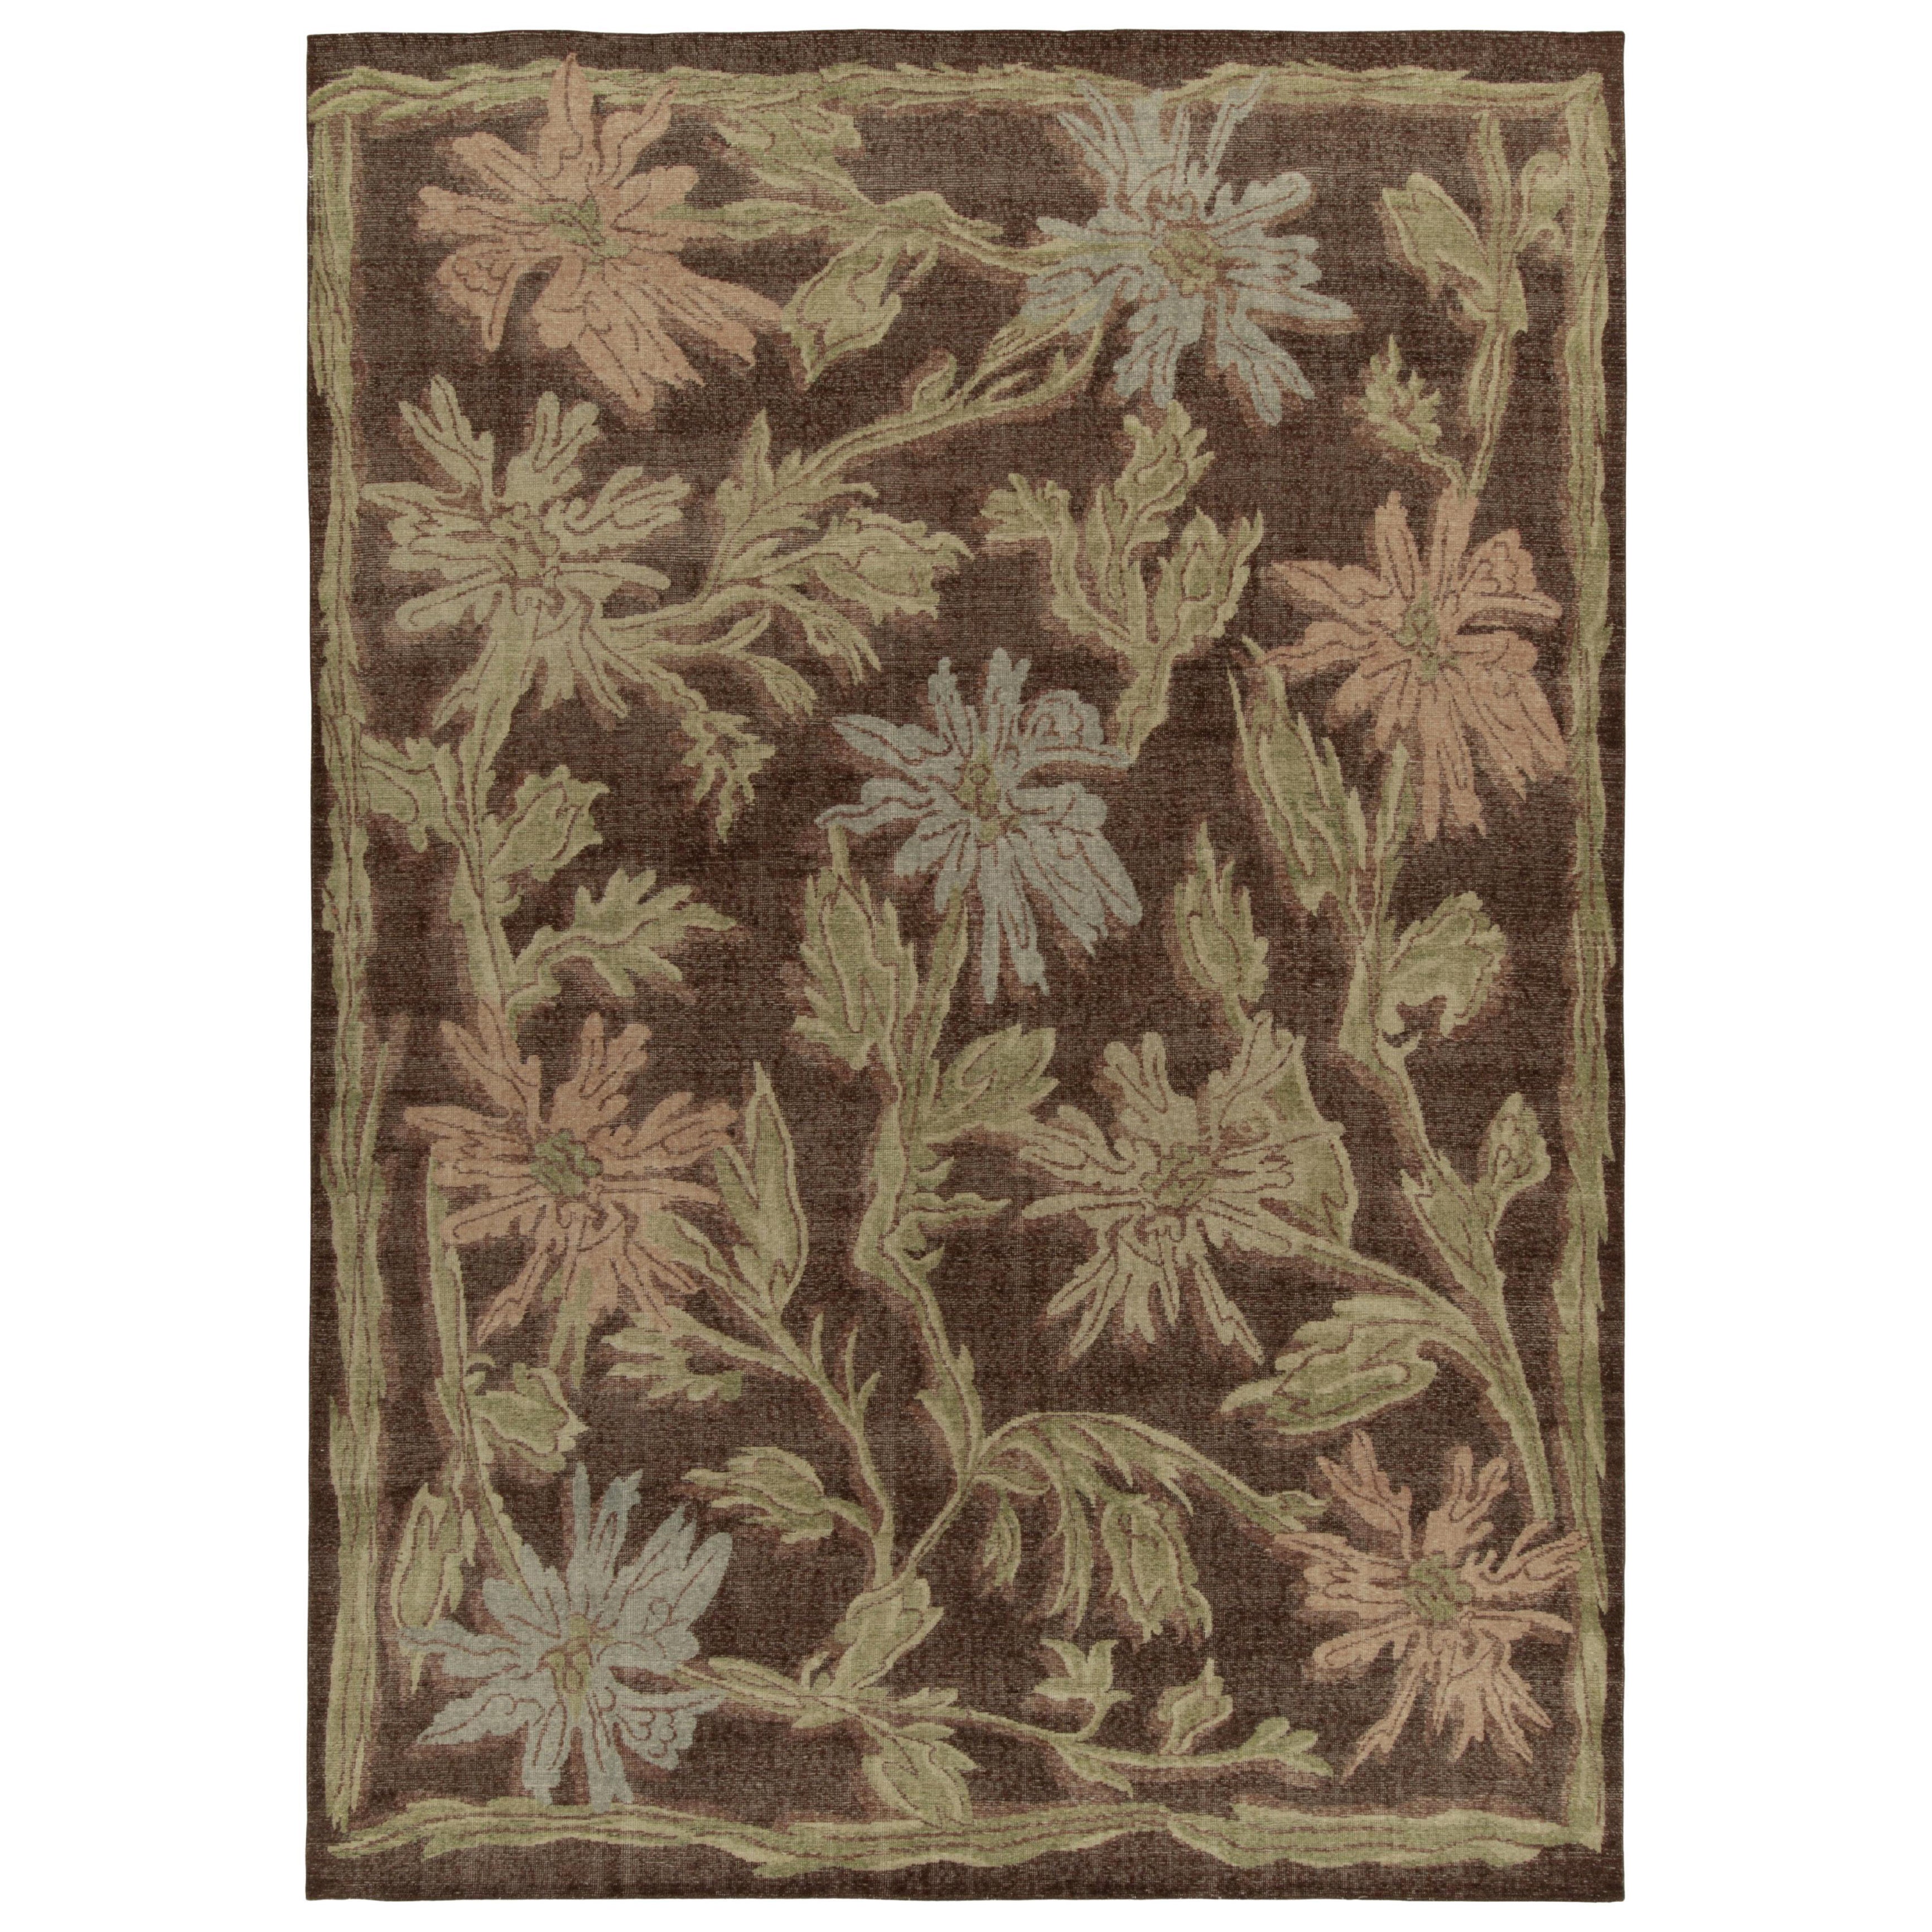 Rug & Kilim’s Distressed Style Rug in Brown and Green Floral Patterns For Sale